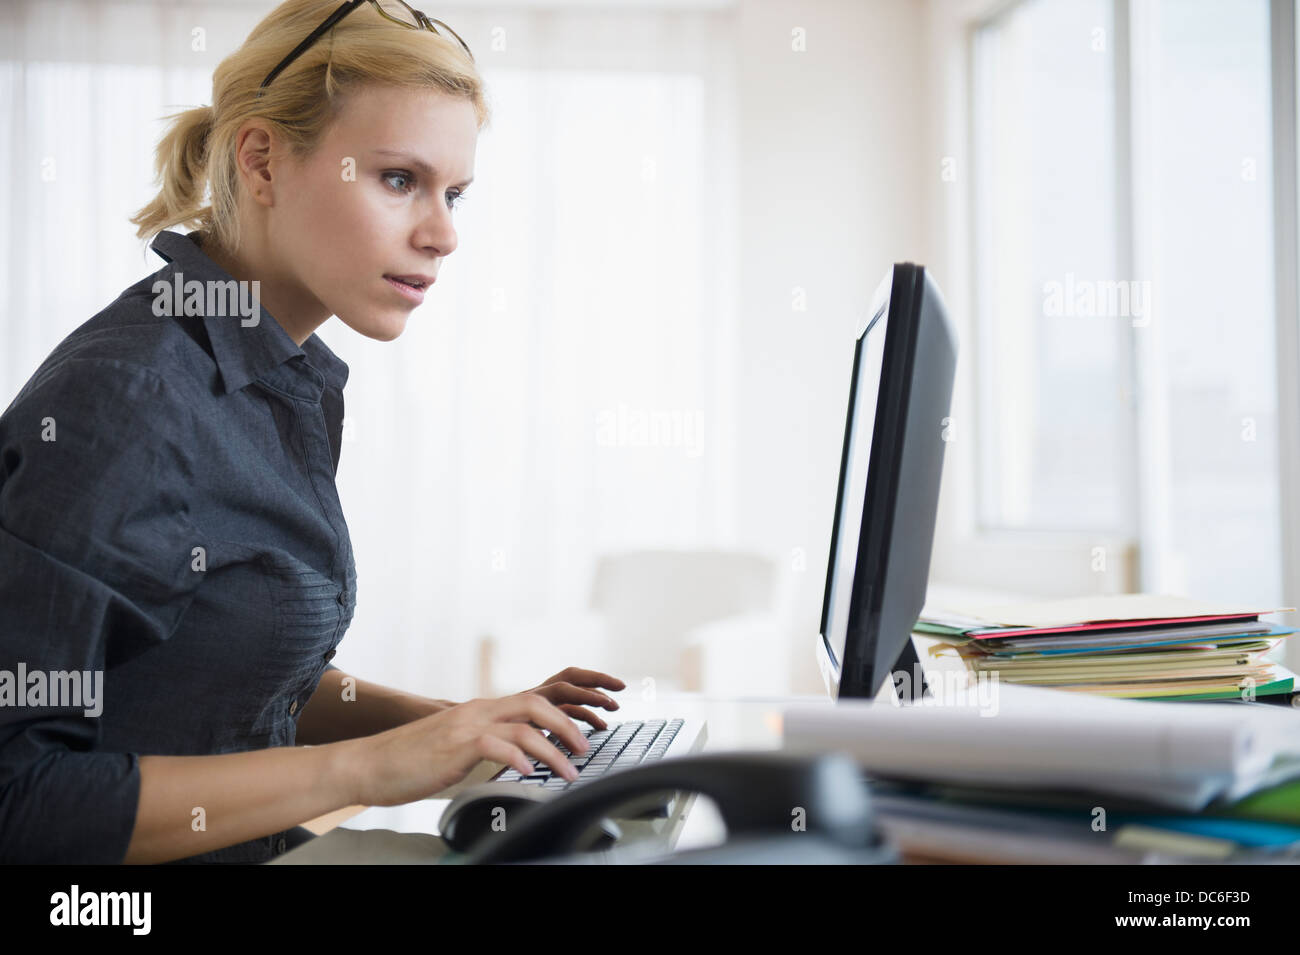 Young woman working at desk in office Banque D'Images